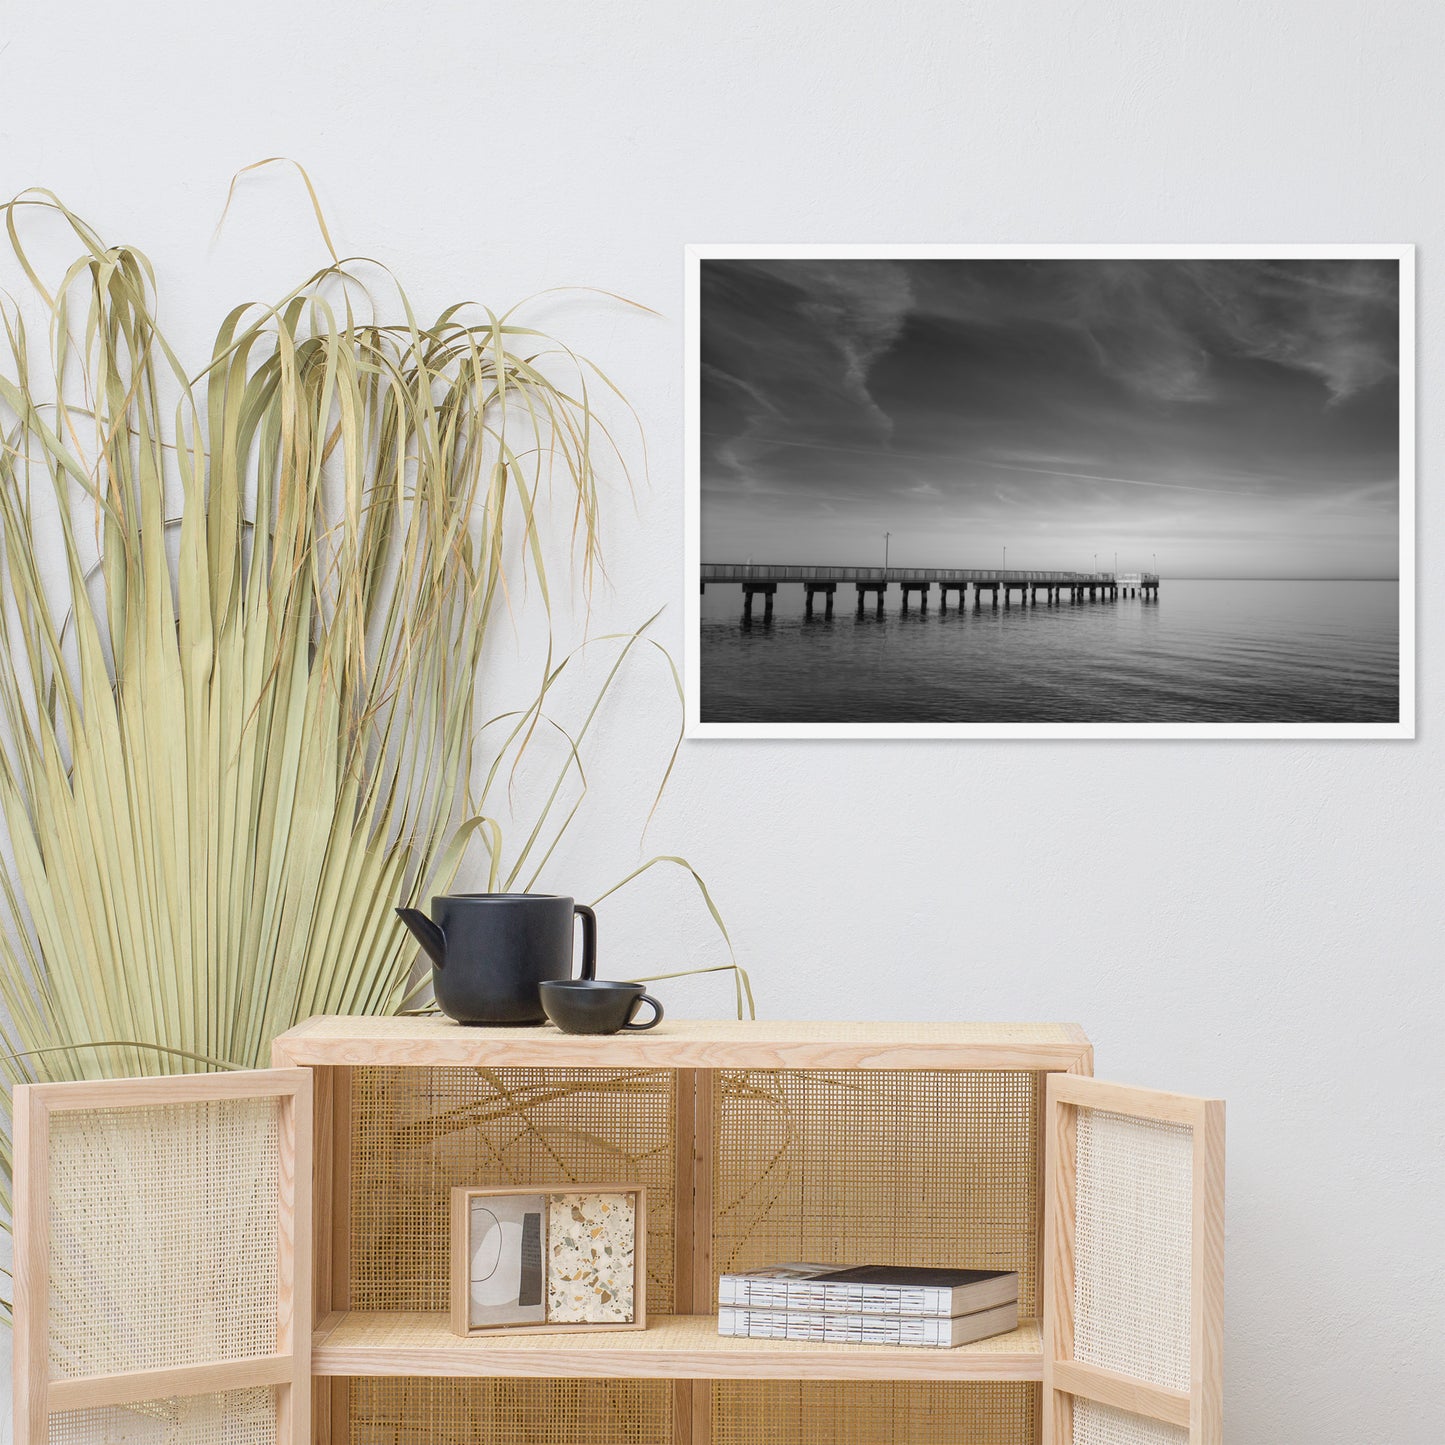 End of the Pier Black and White Framed Photo Wall Art Prints